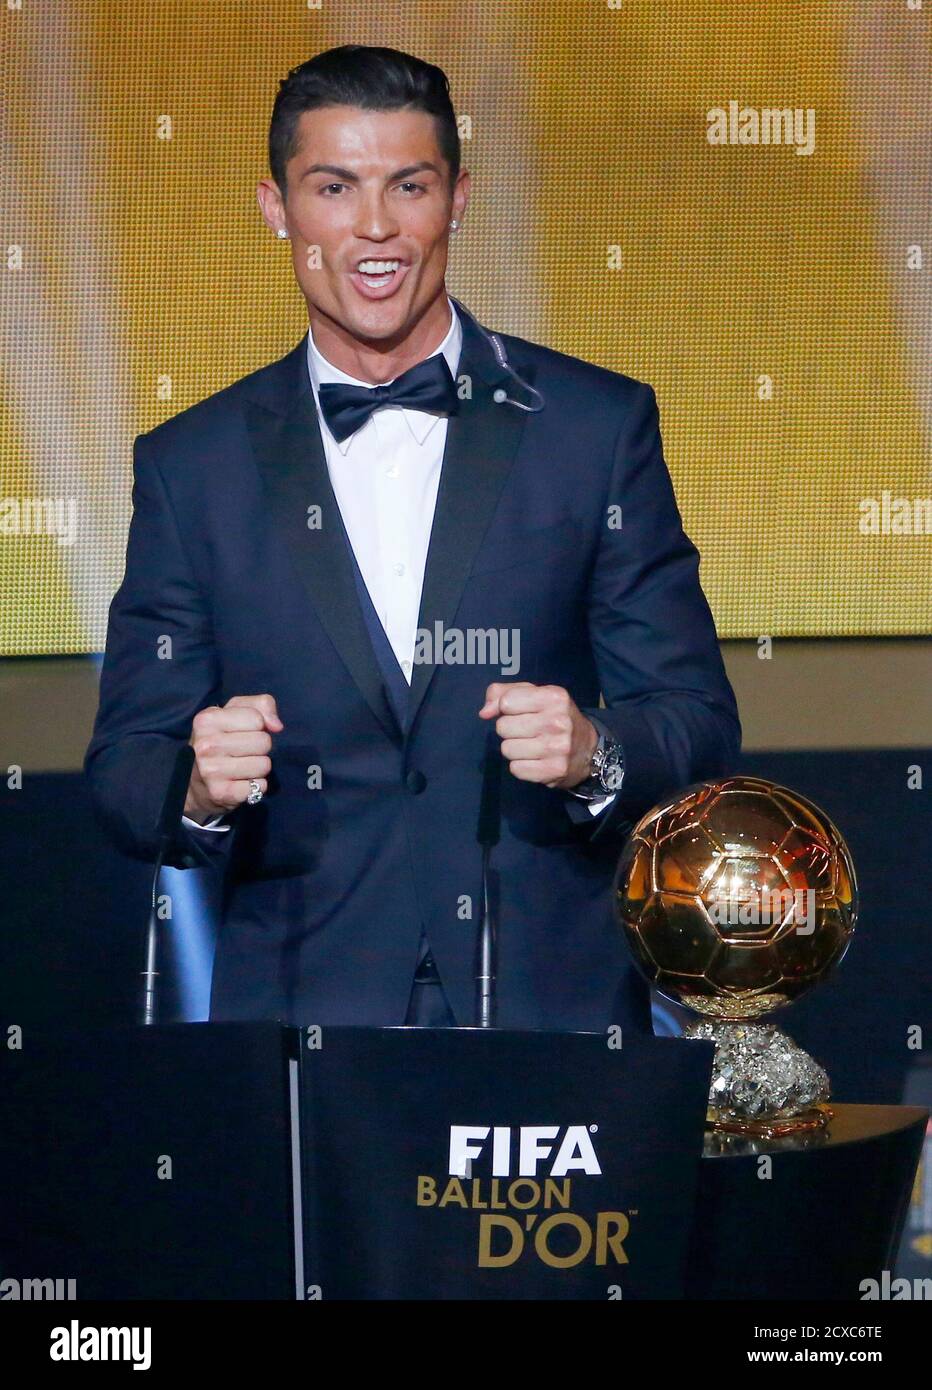 Real Madrid's Cristiano Ronaldo of Portugal, makes a speech after winning  the 2014 FIFA World Player of the Year during the FIFA Ballon d'Or 2014  soccer awards ceremony at the Kongresshaus in